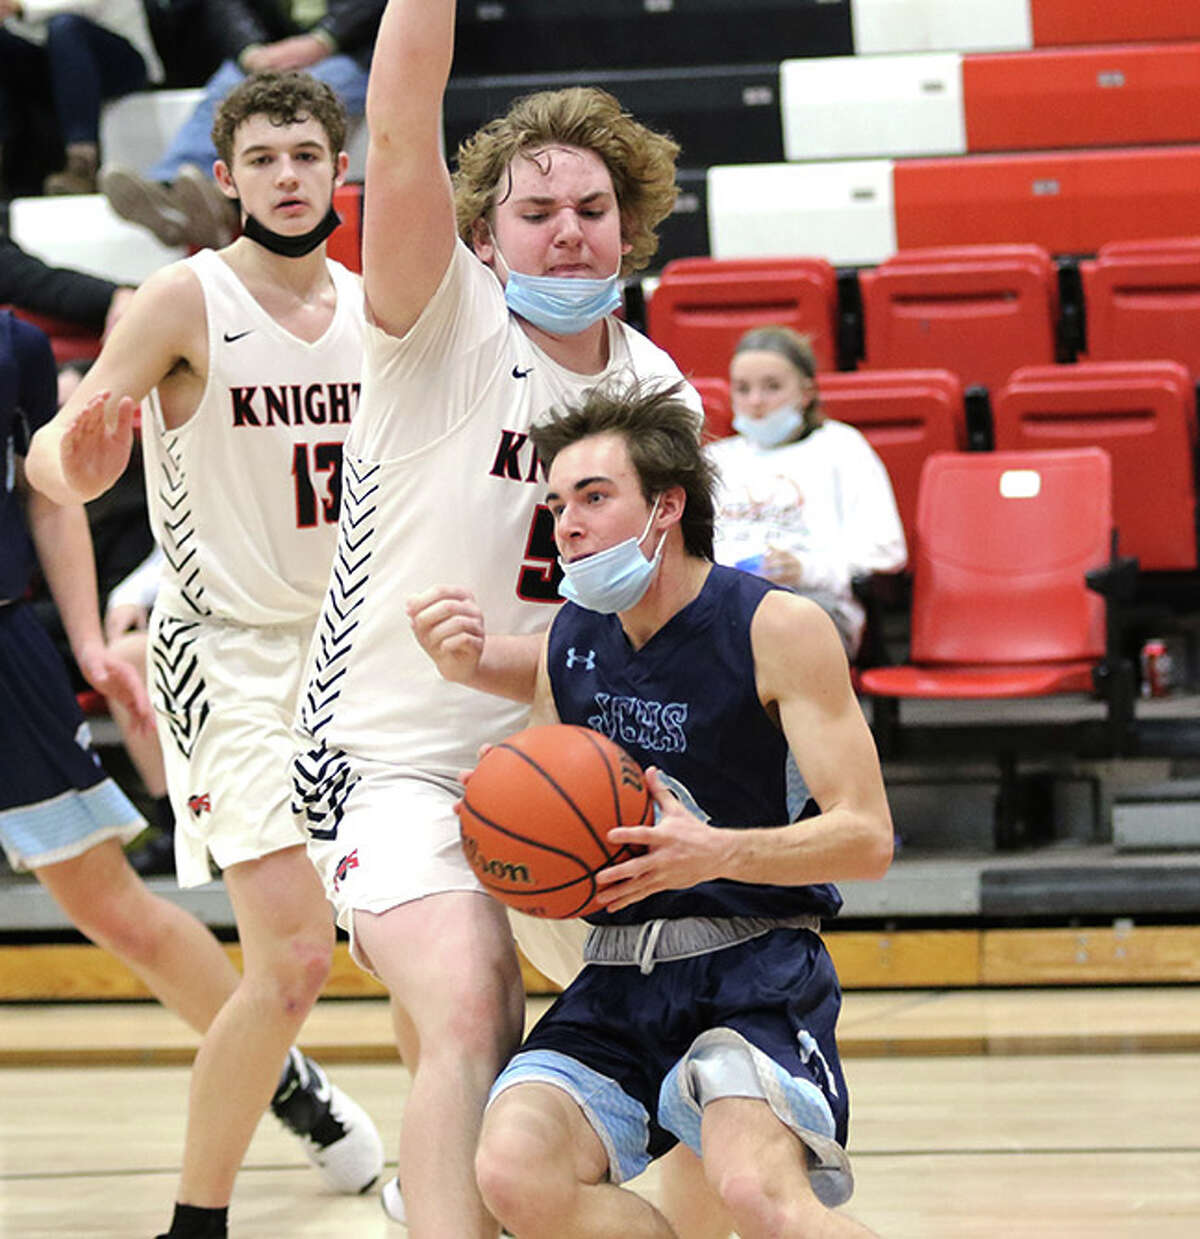 Jersey's Drake Goetten (right) drives baseline and looks for options against Triad's 6-7 Lane Mahnesmith in the second half Friday night at Rich Mason Gym in Troy.